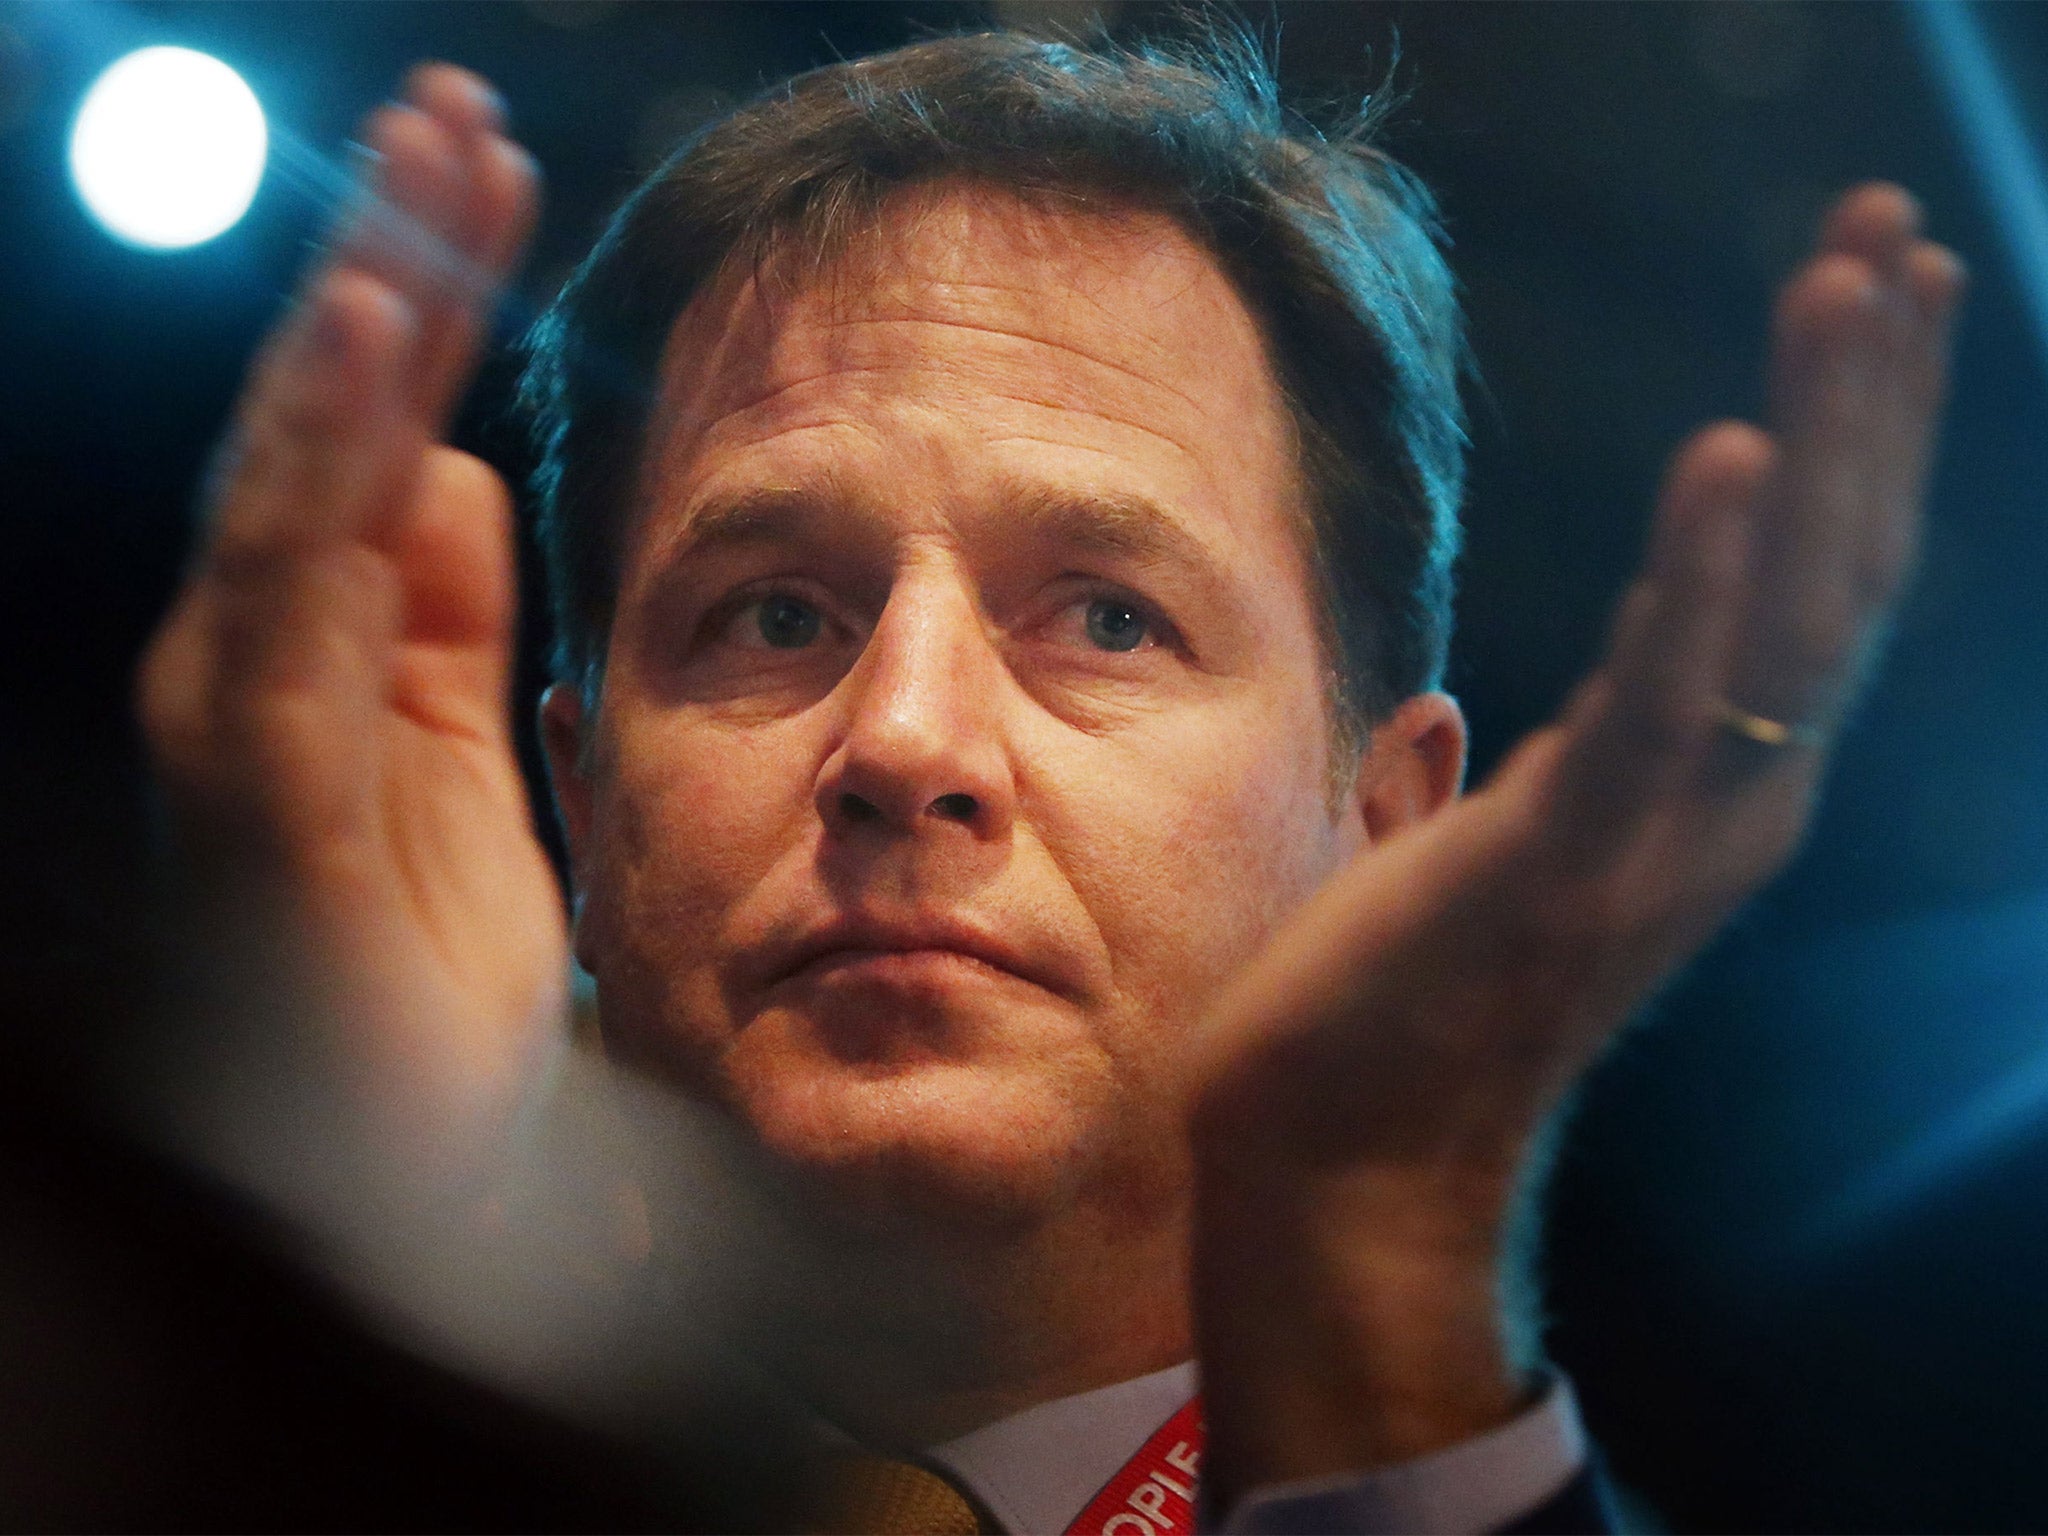 Nick Clegg accused the Tories of wanting to 'cut taxes for the wealthiest, paid for by the working poor'